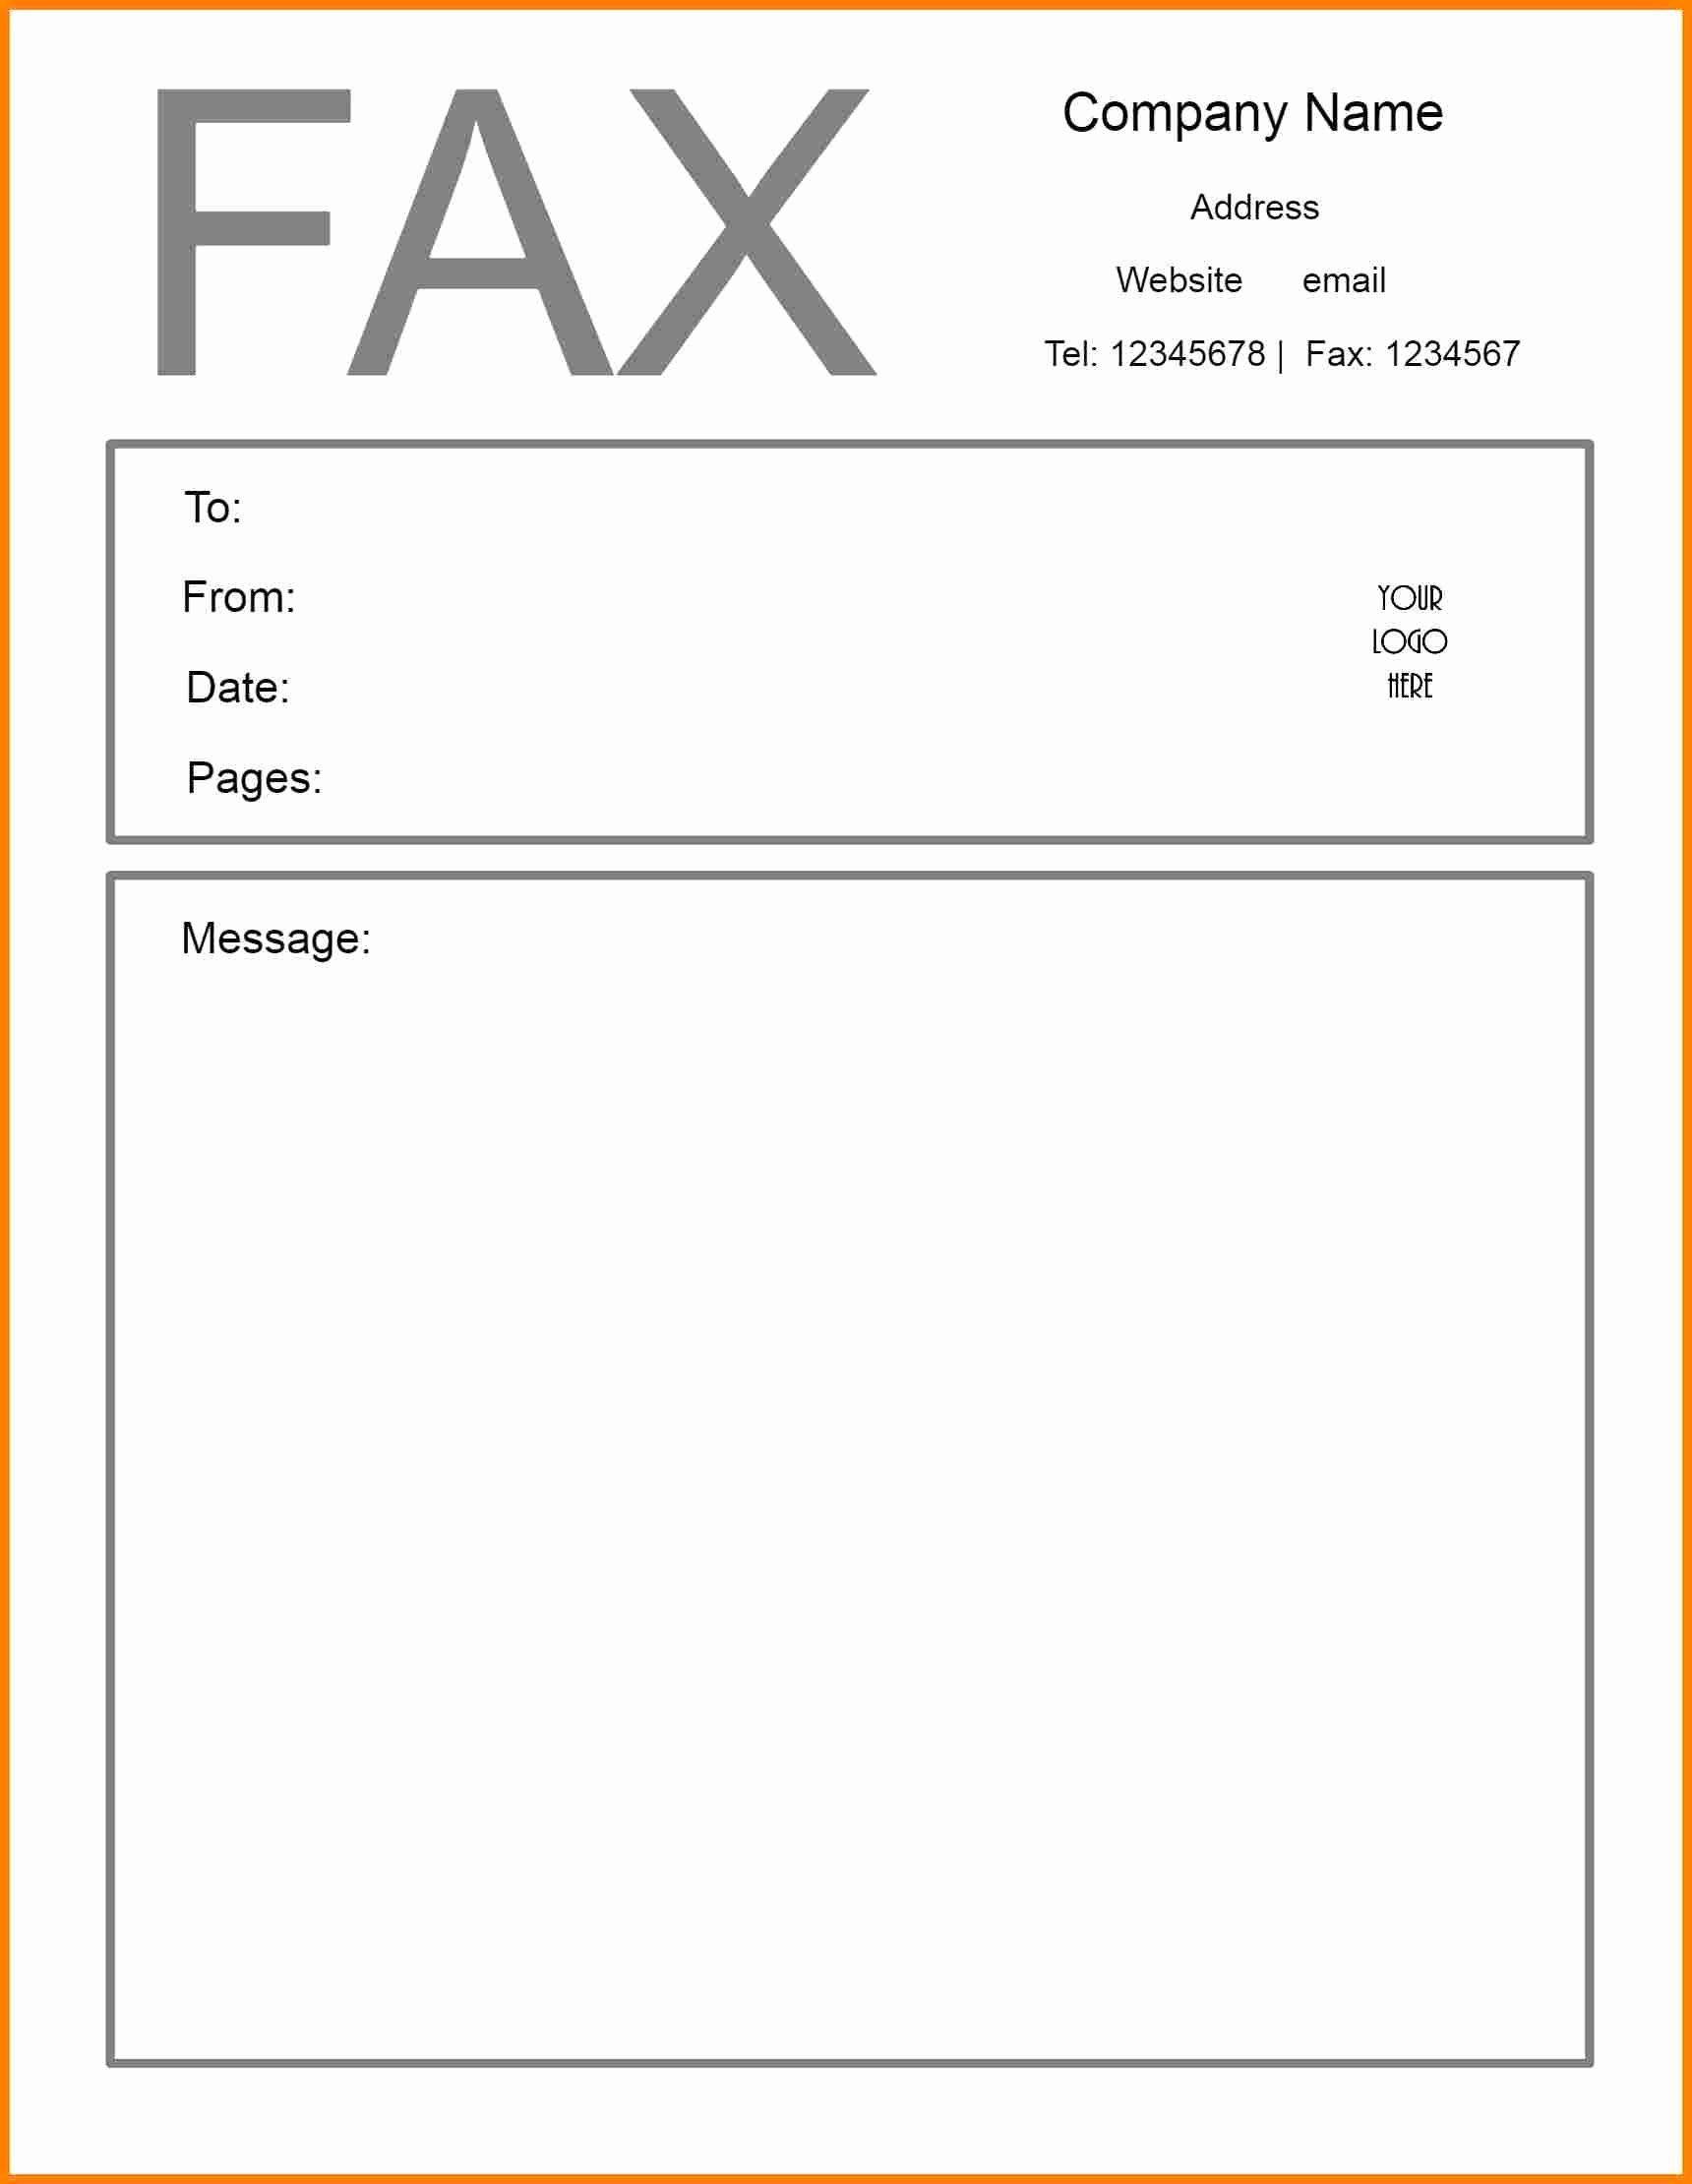 Fax Cover Sheet Template Free Unique Fax Header Template Word Picture – Microsoft Word Fax